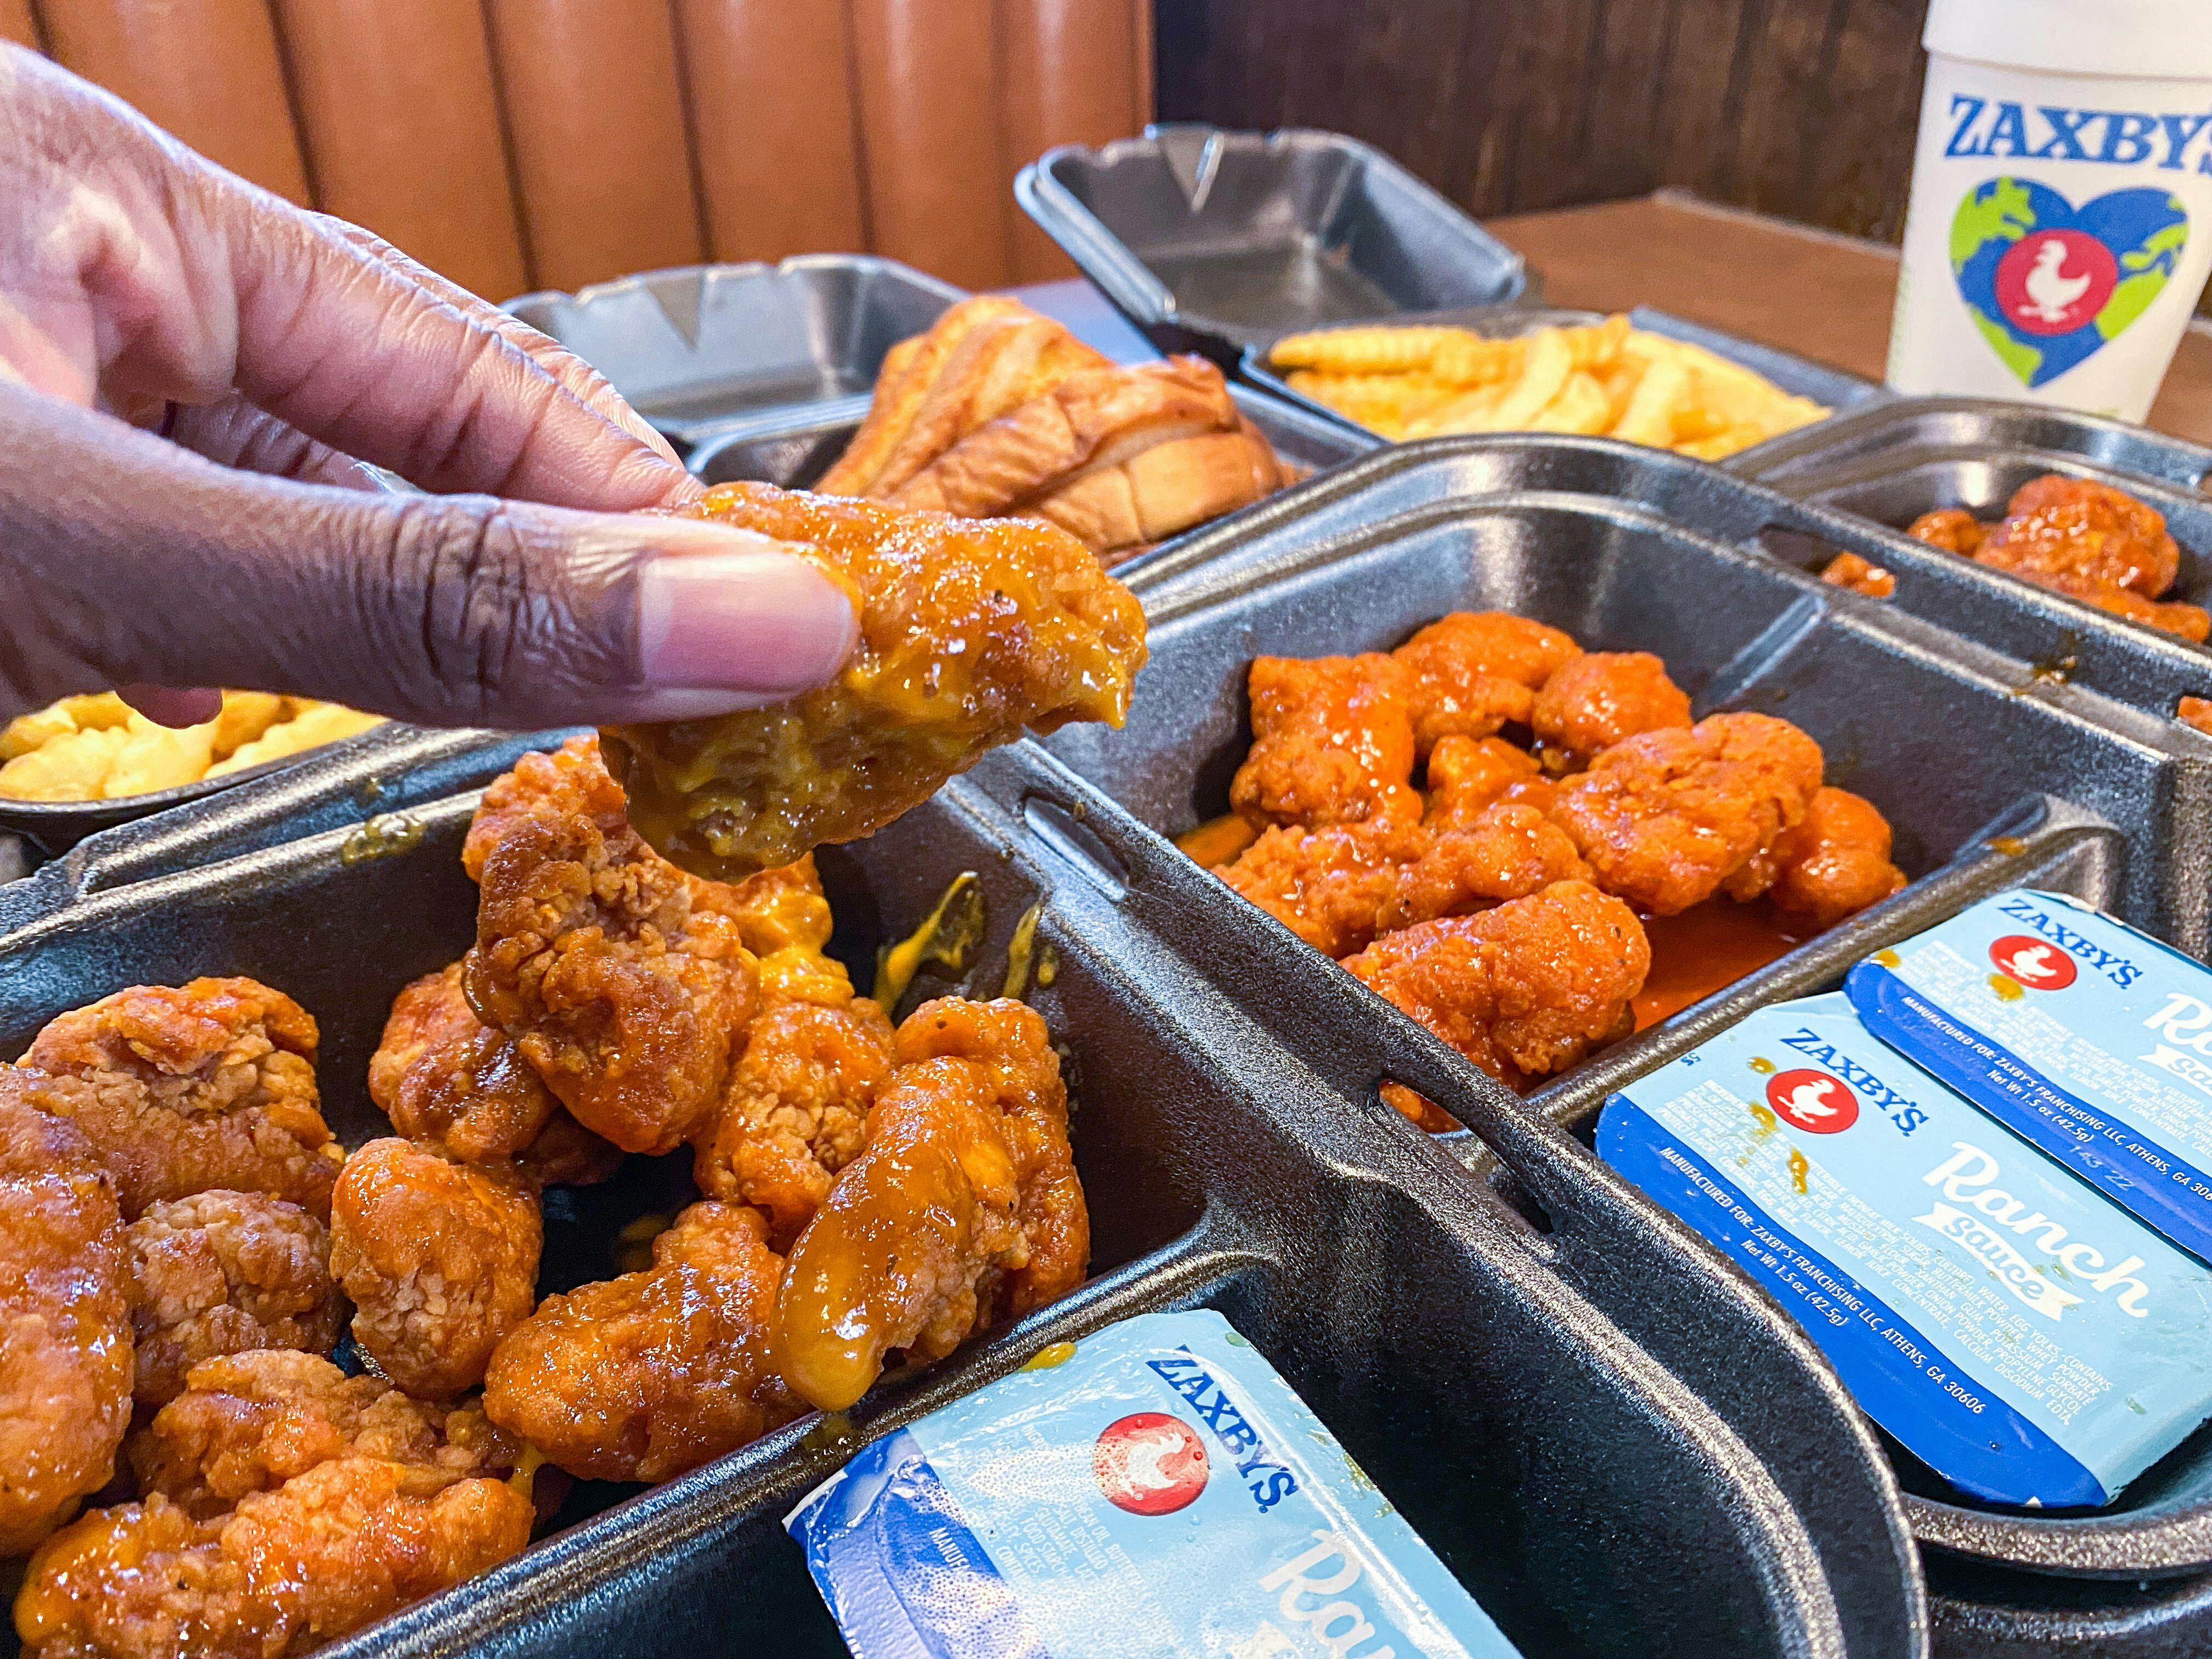 A person's hand taking a piece of chicken out of a box of boneless chicken wings on a table at Zaxby's.